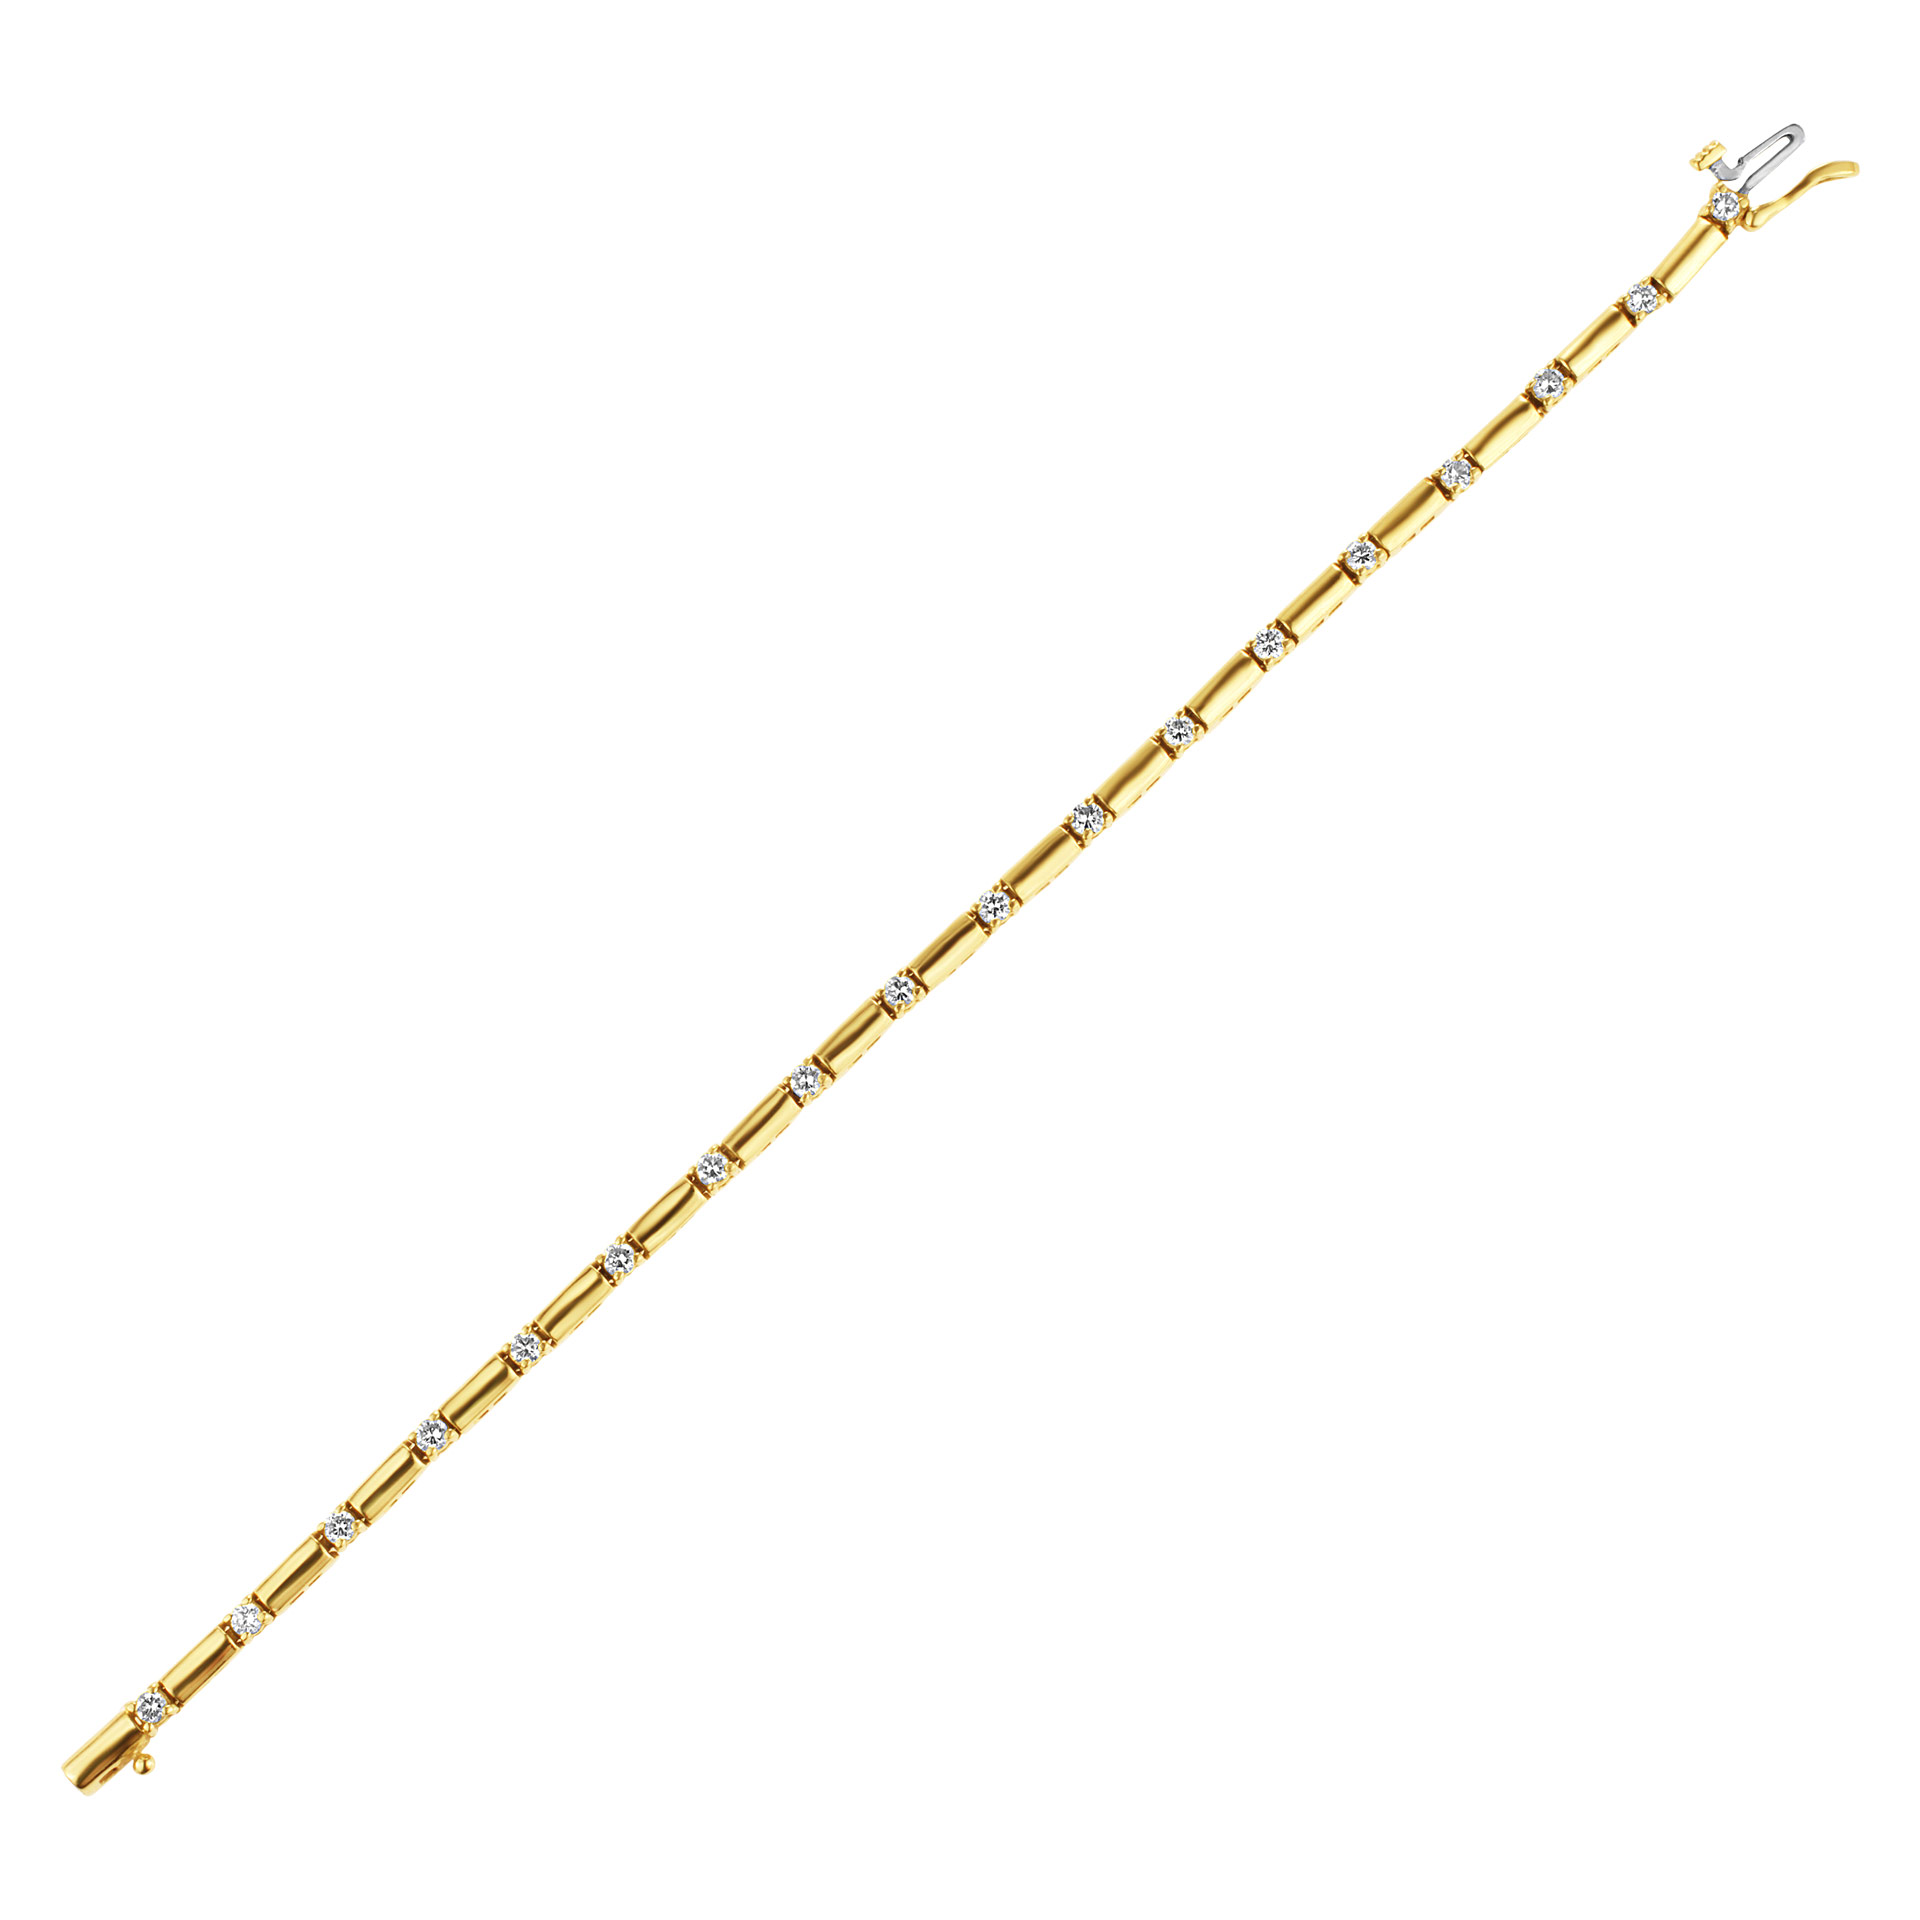 Line Bracelet In 14k Yellow Gold With Diamond Stations. 1.00 cts in diamonds